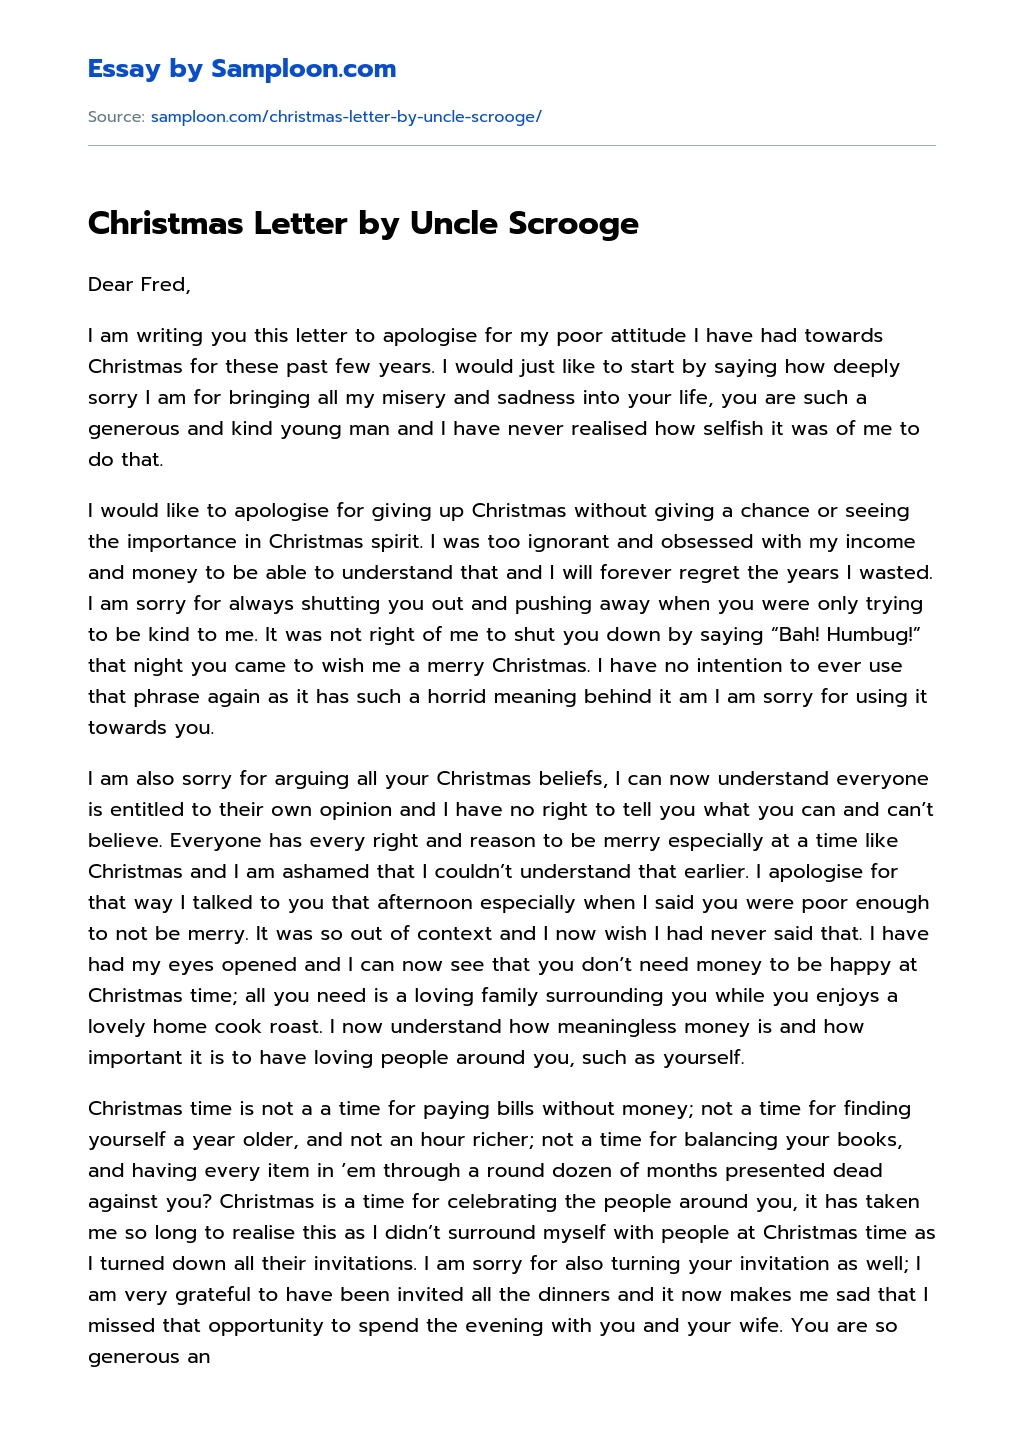 Christmas Letter by Uncle Scrooge essay